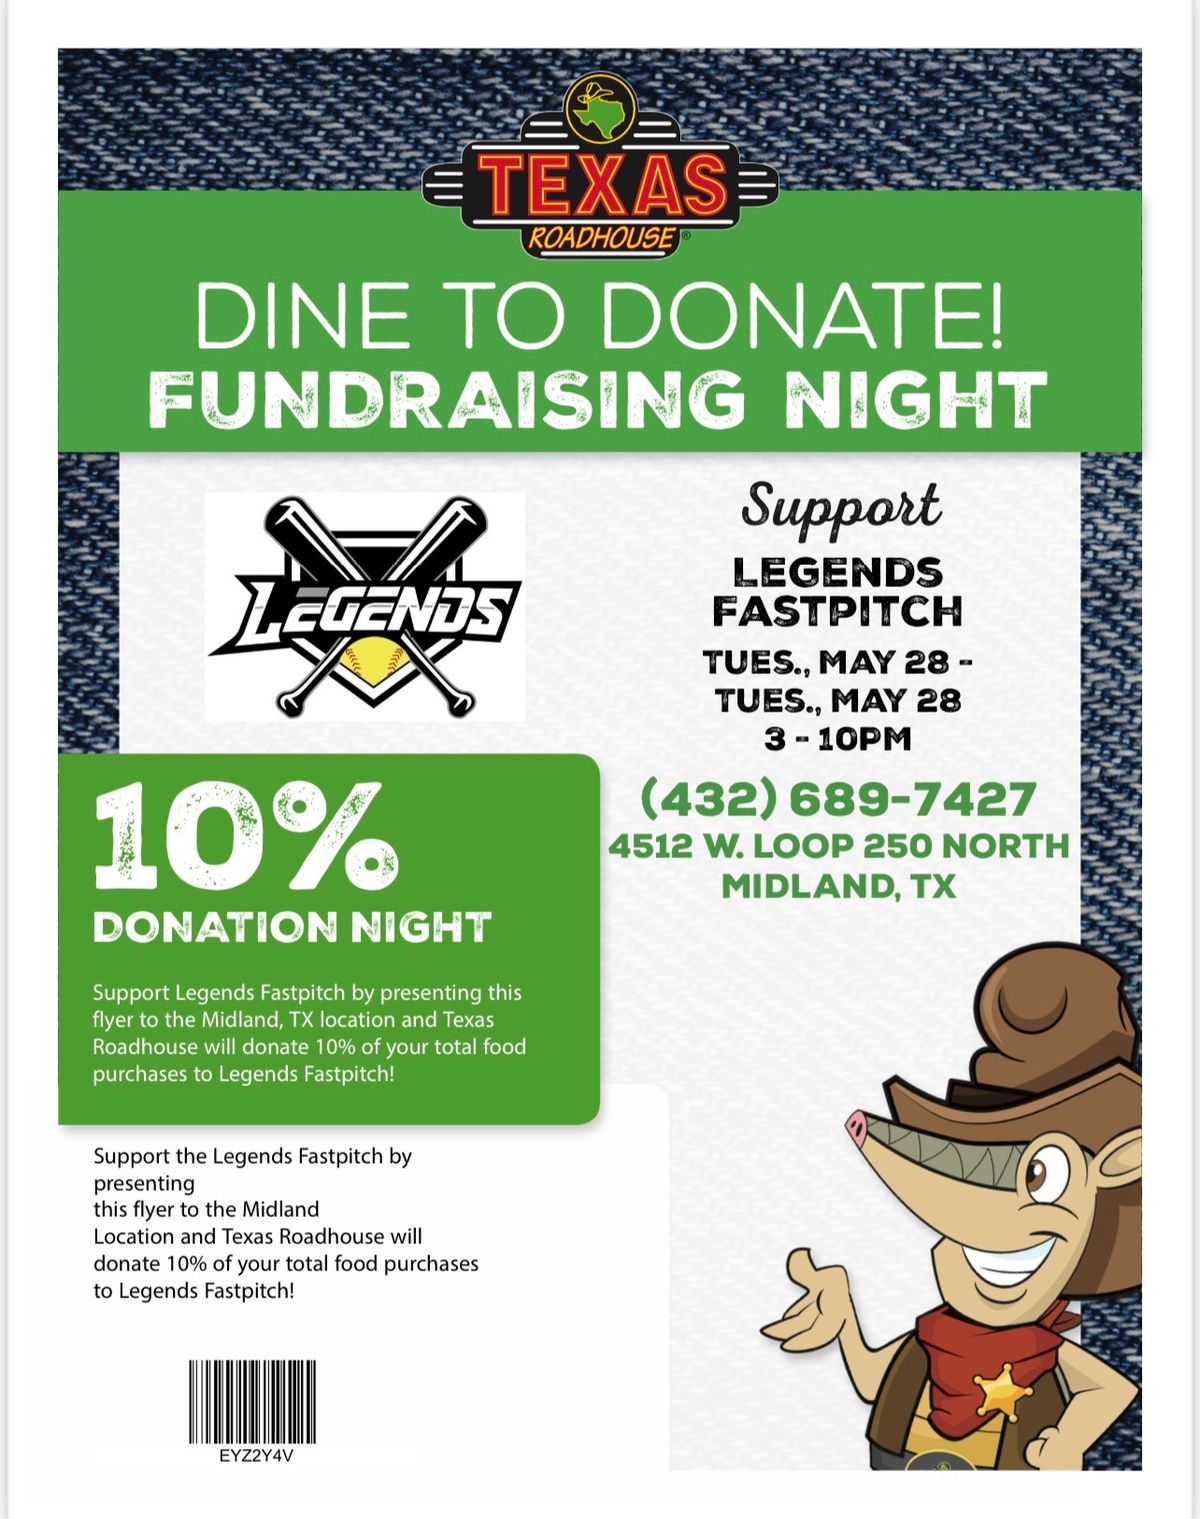 Support Legends Fastpitch at Texas Roadhouse